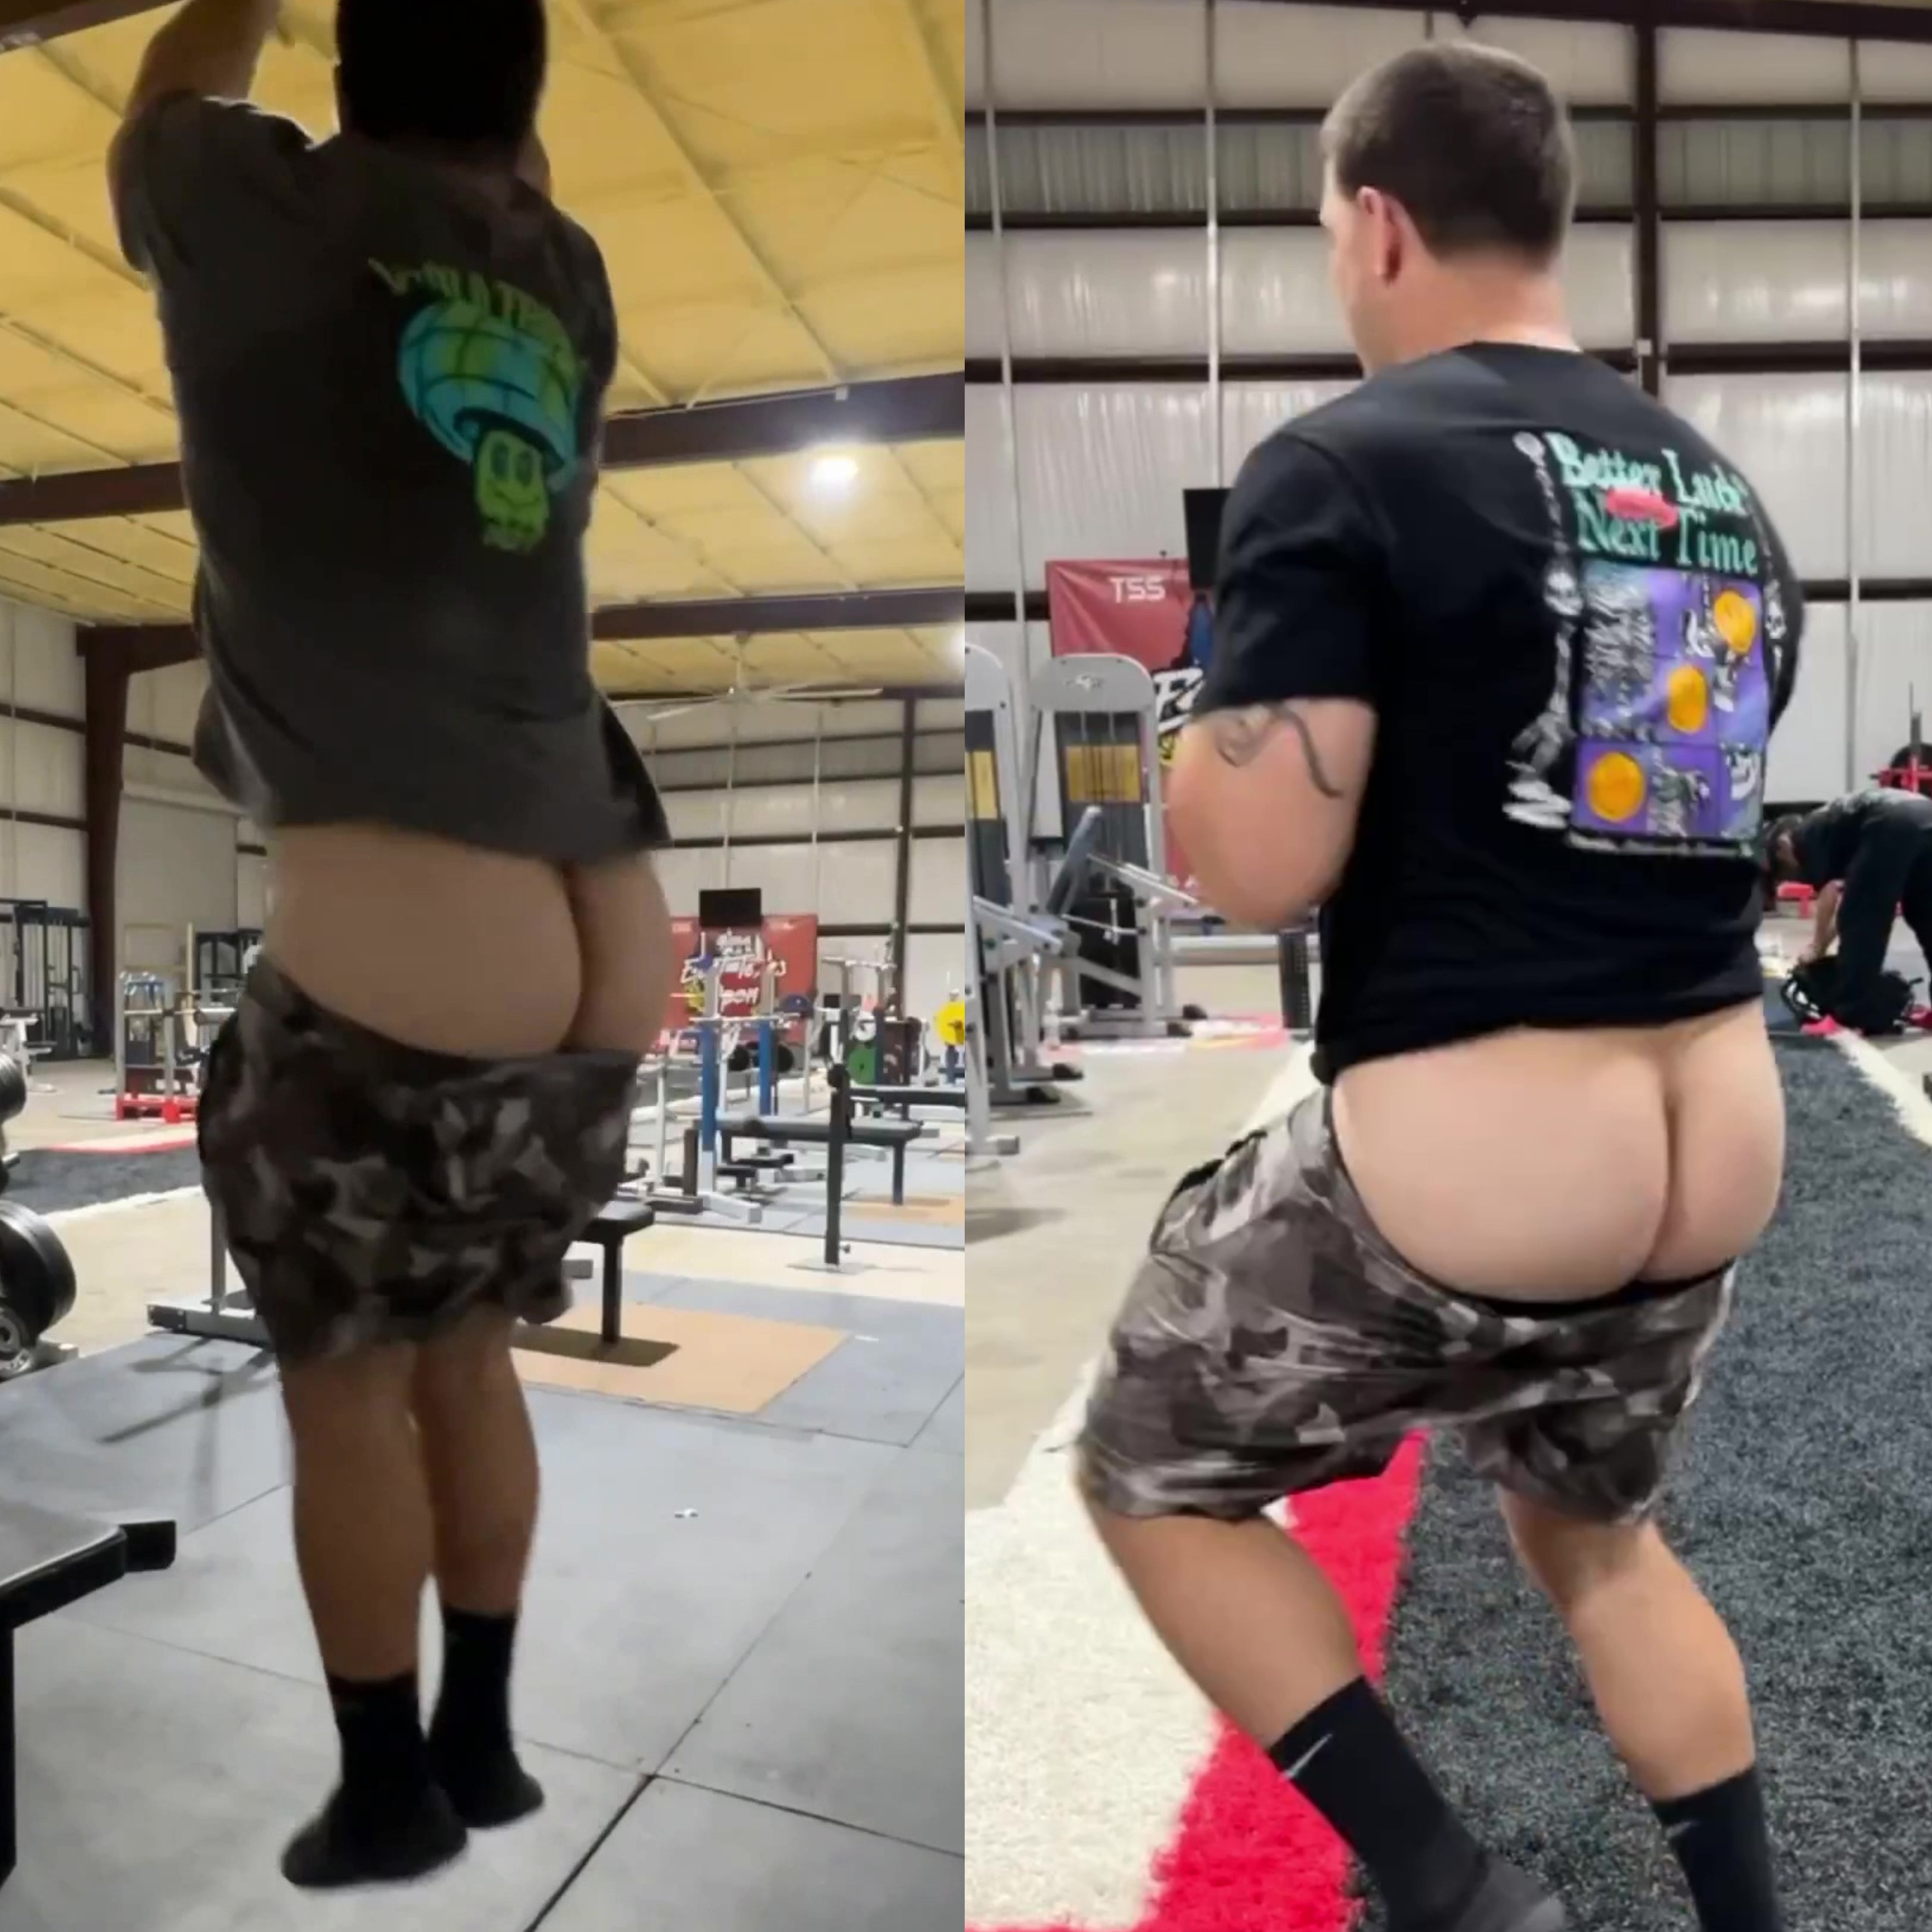 Big Cheeks Fitness Instructor Loves Showing Ass! 2